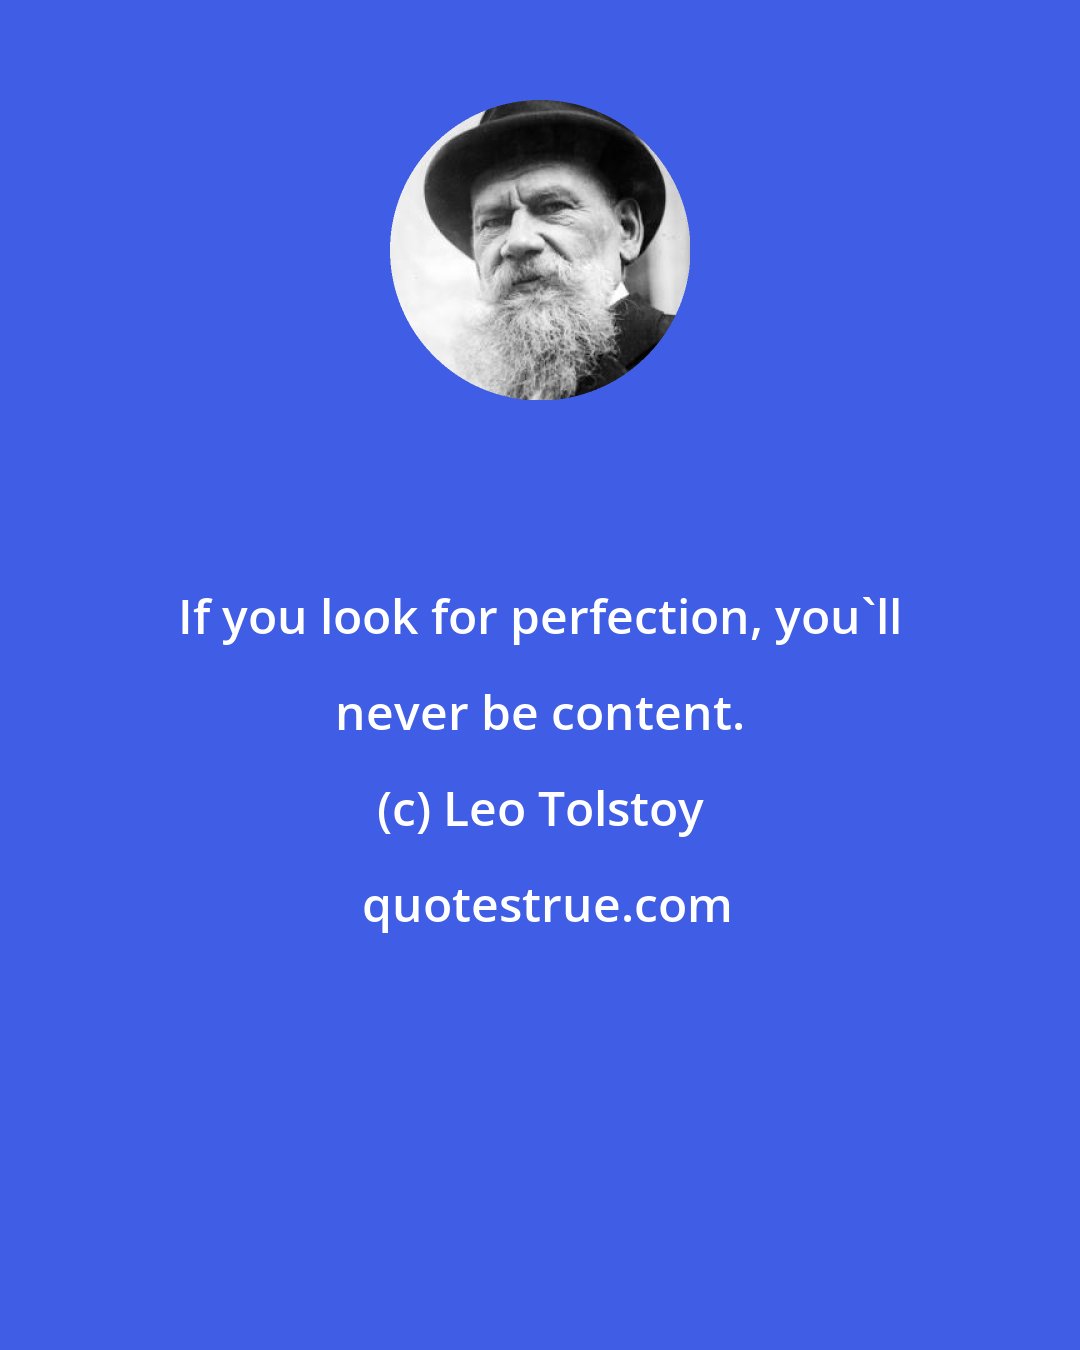 Leo Tolstoy: If you look for perfection, you'll never be content.